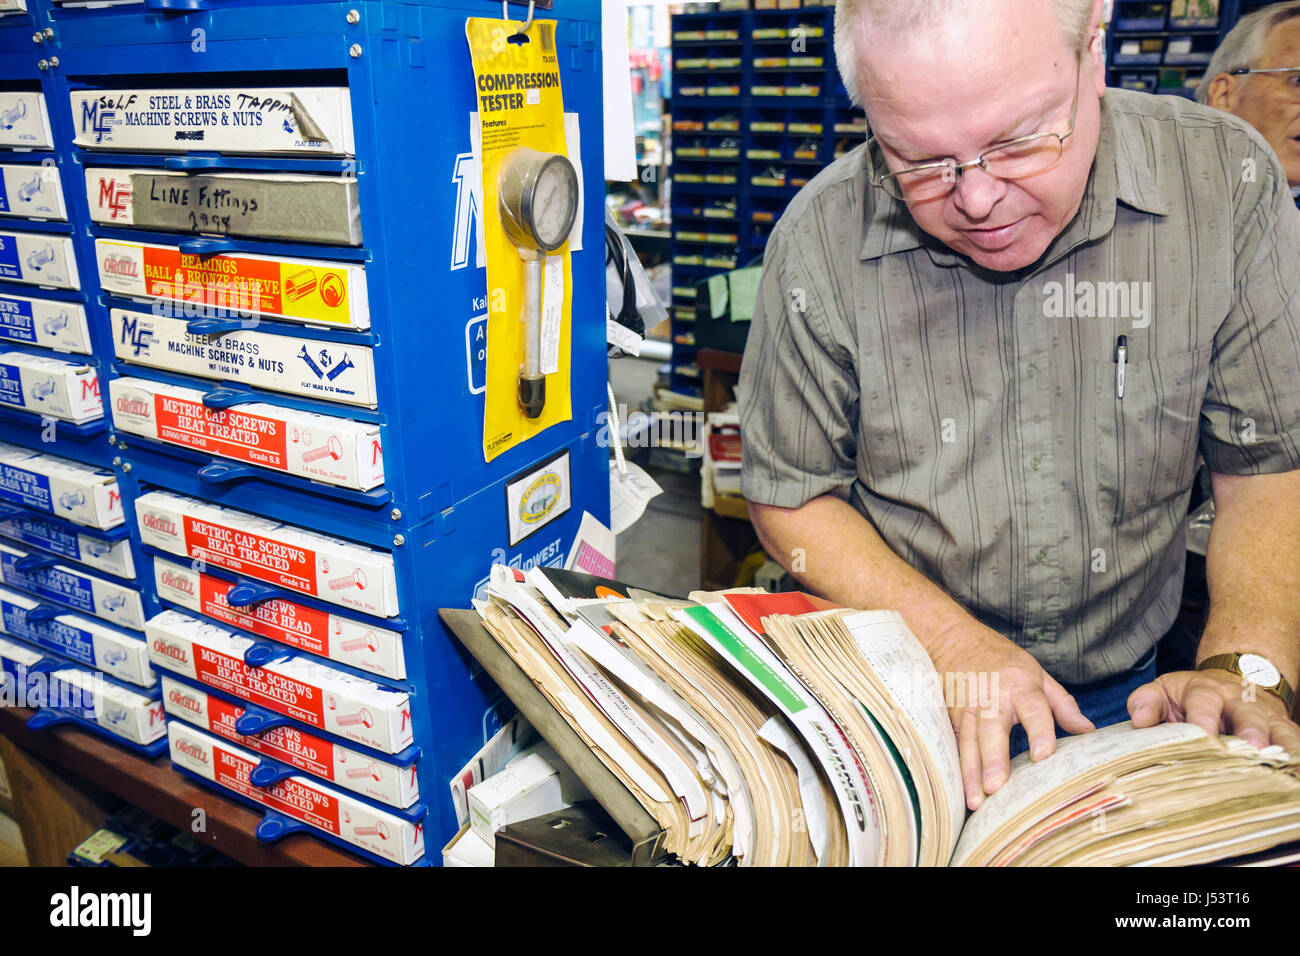 Arkansas Randolph County,Pocahontas,Western Auto,hardware,tractor parts,automobile parts,man men male,middle aged,store,stores,businesses,district,sho Stock Photo